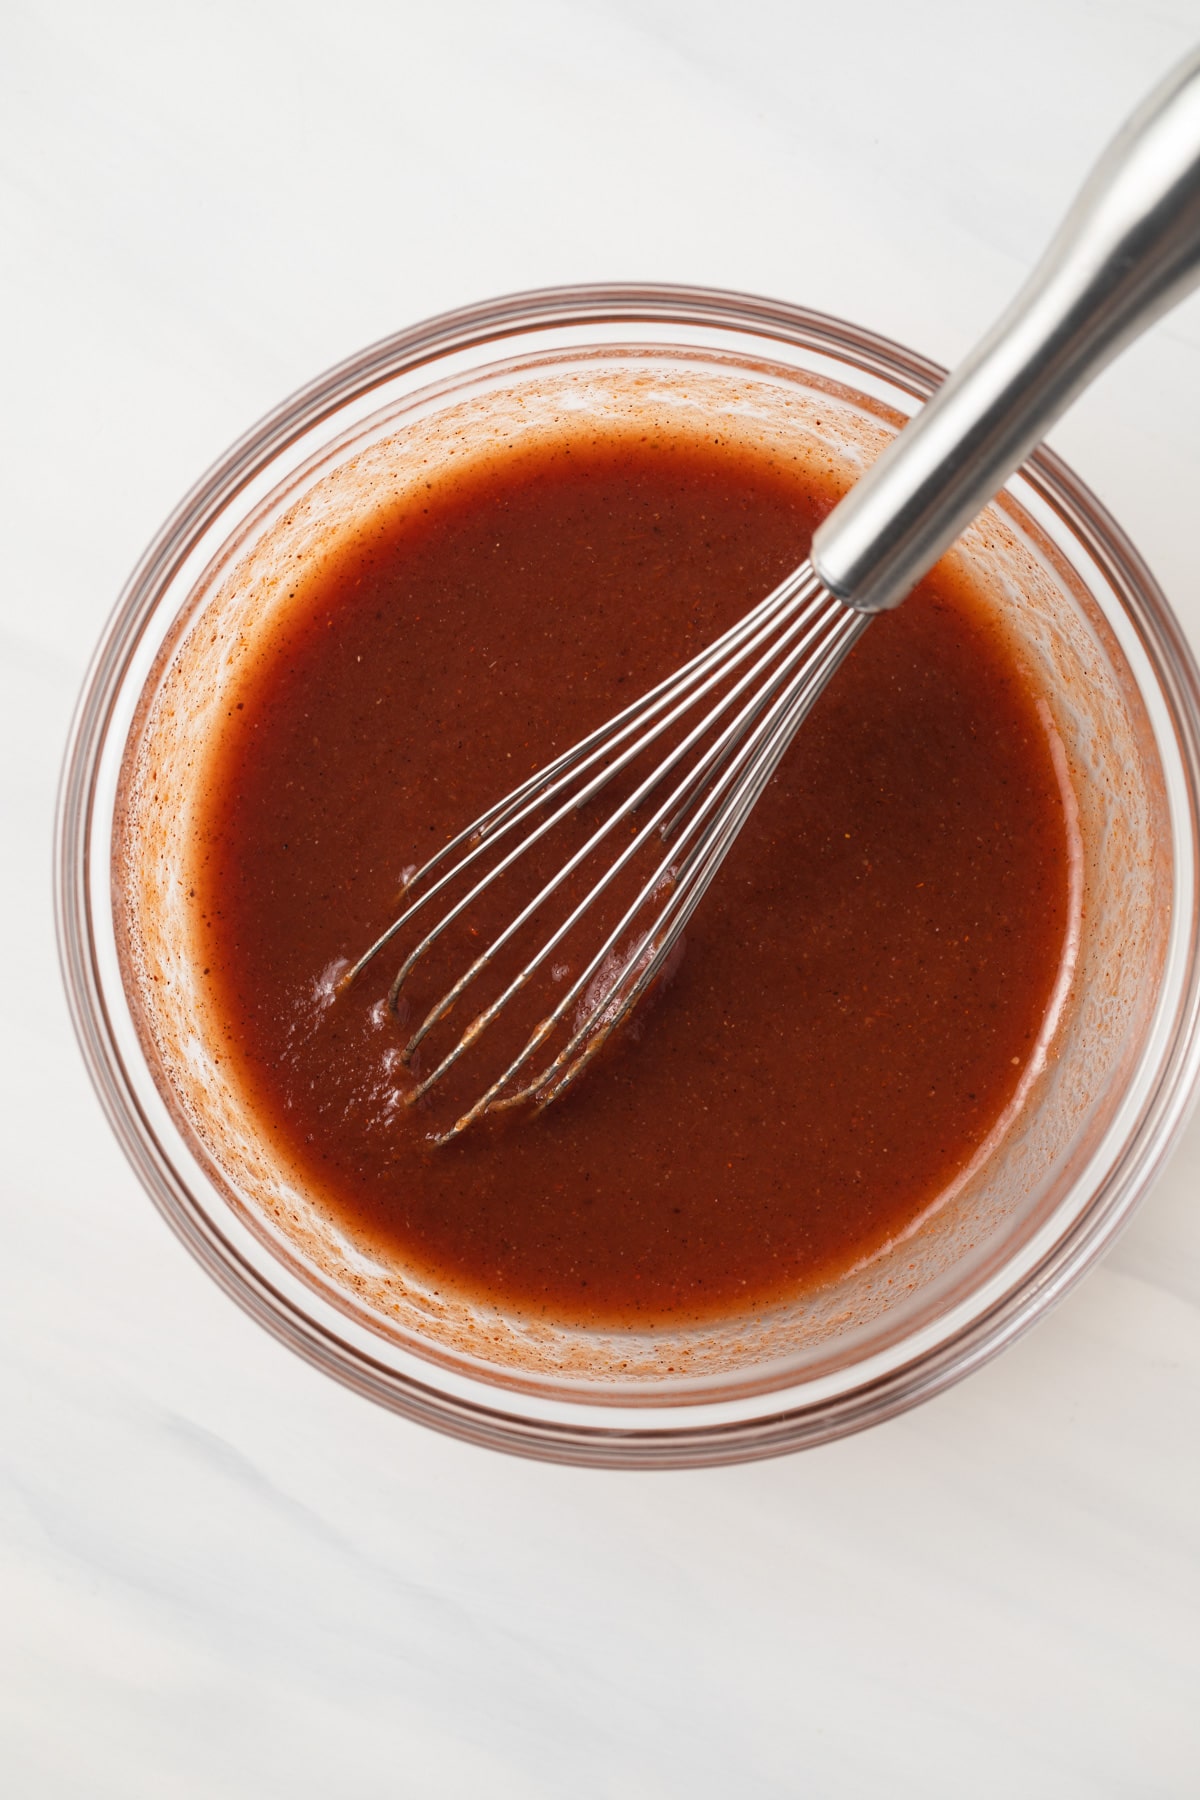 Chili sauce in glass bowl with whisk.